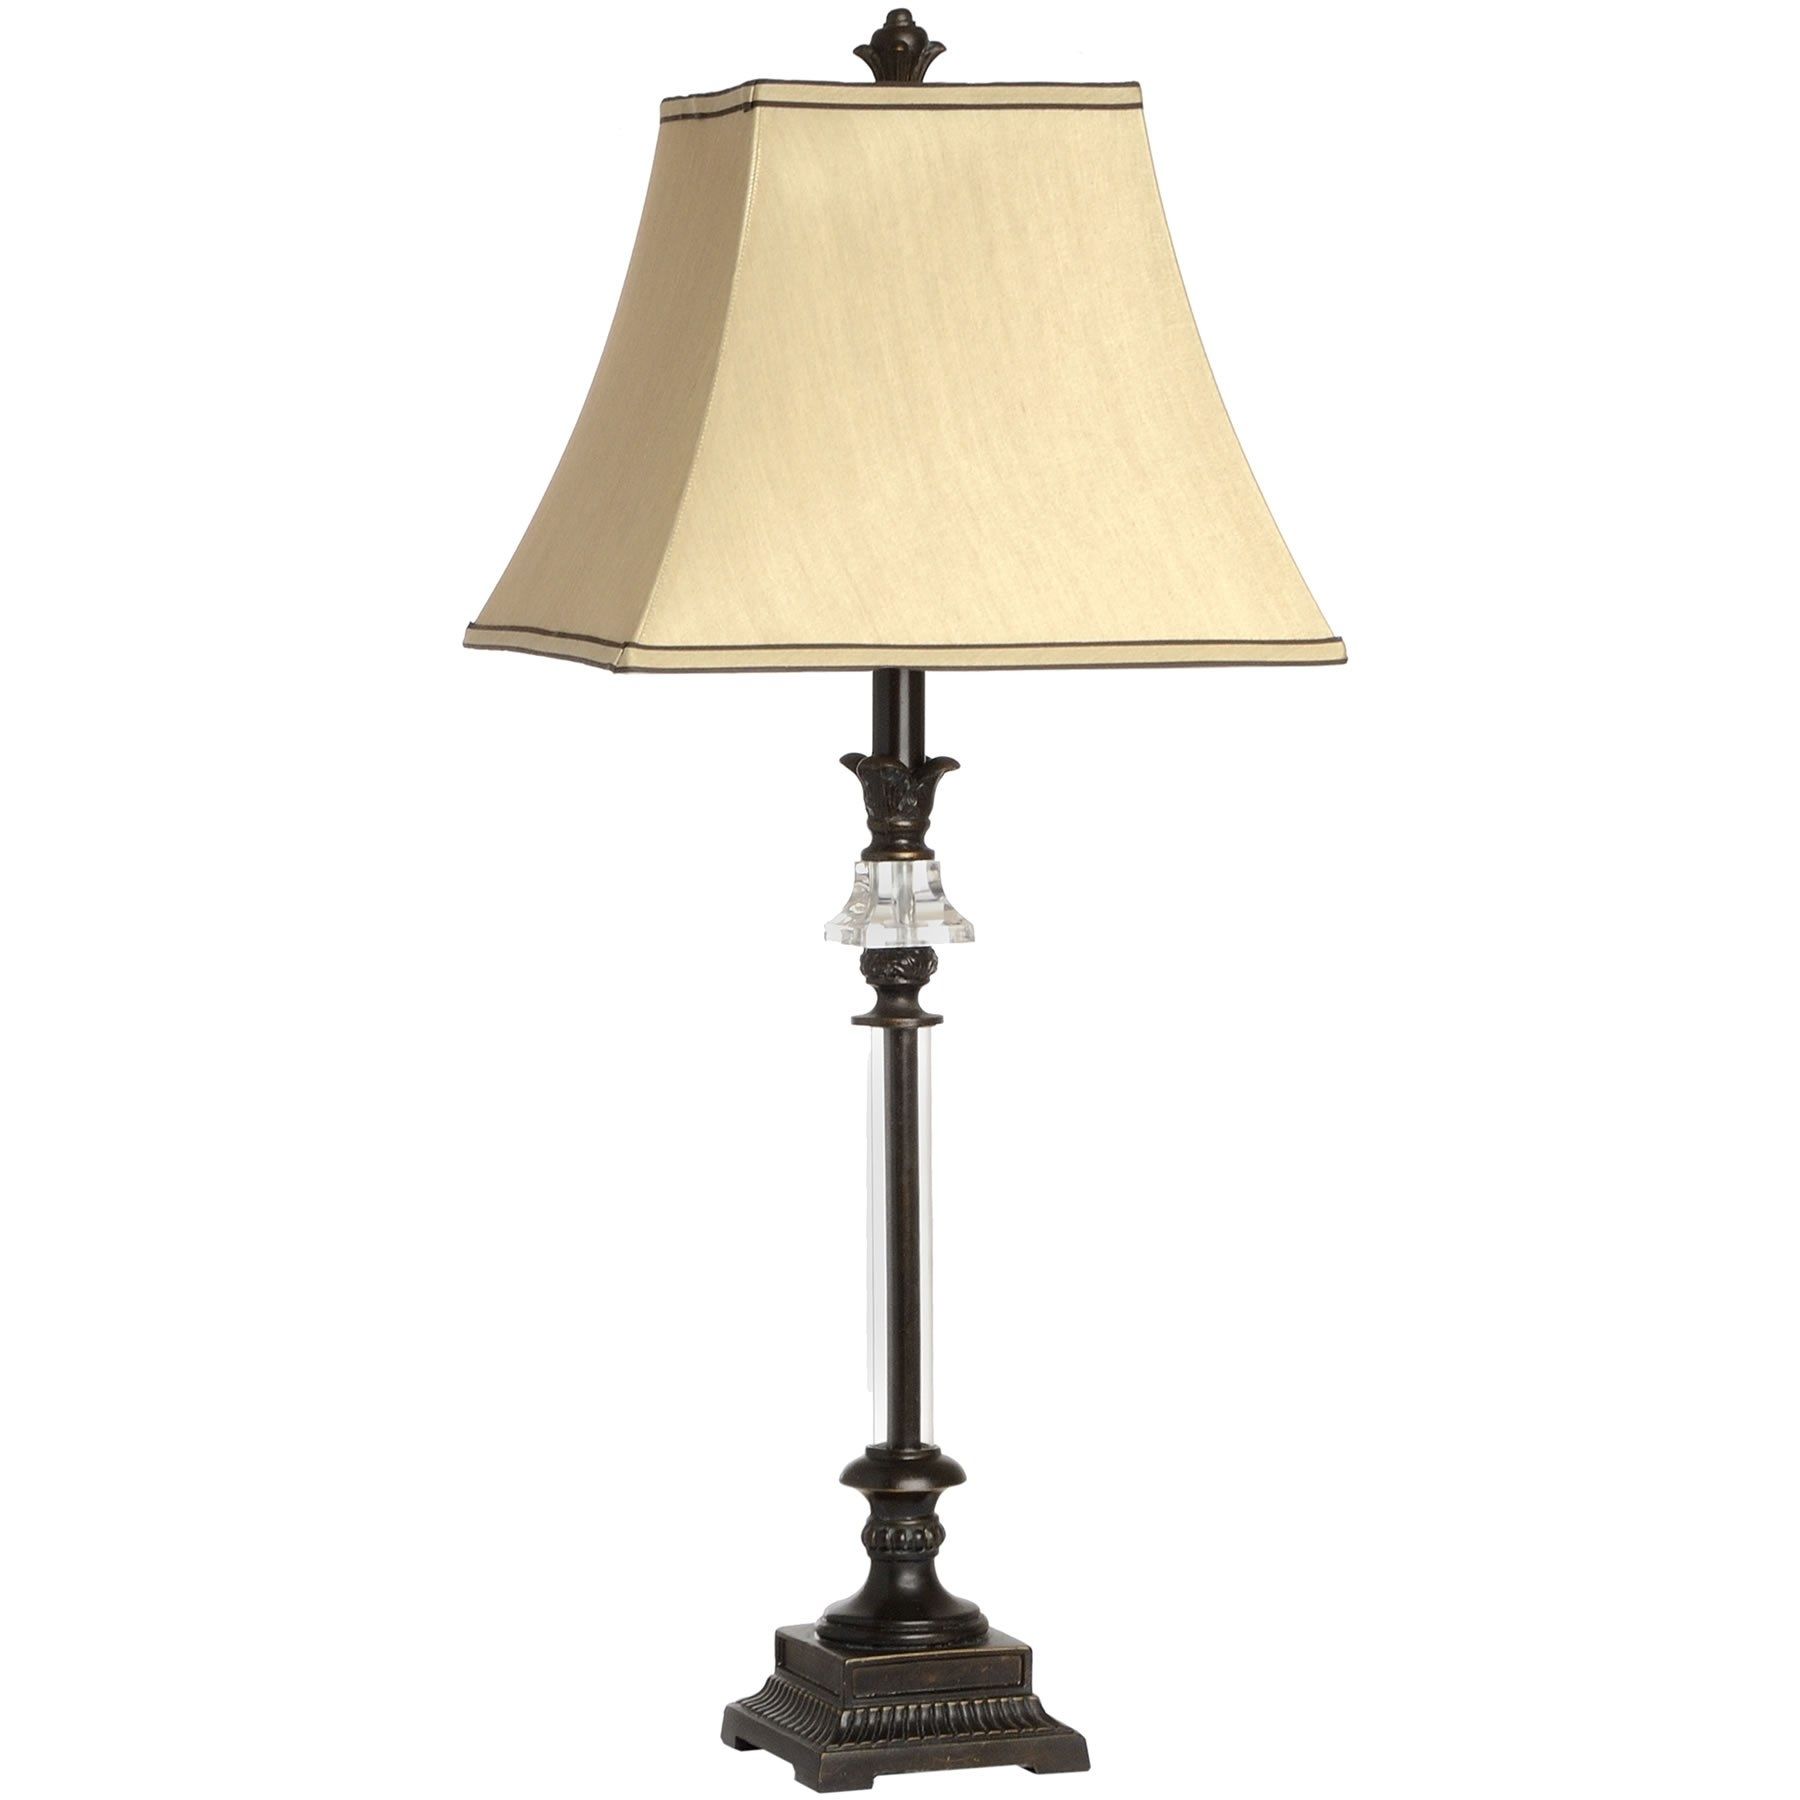 Traditional Table Lamps For Living Room Lamp Shade, Classic Table Throughout Table Lamps For Traditional Living Room (View 6 of 15)